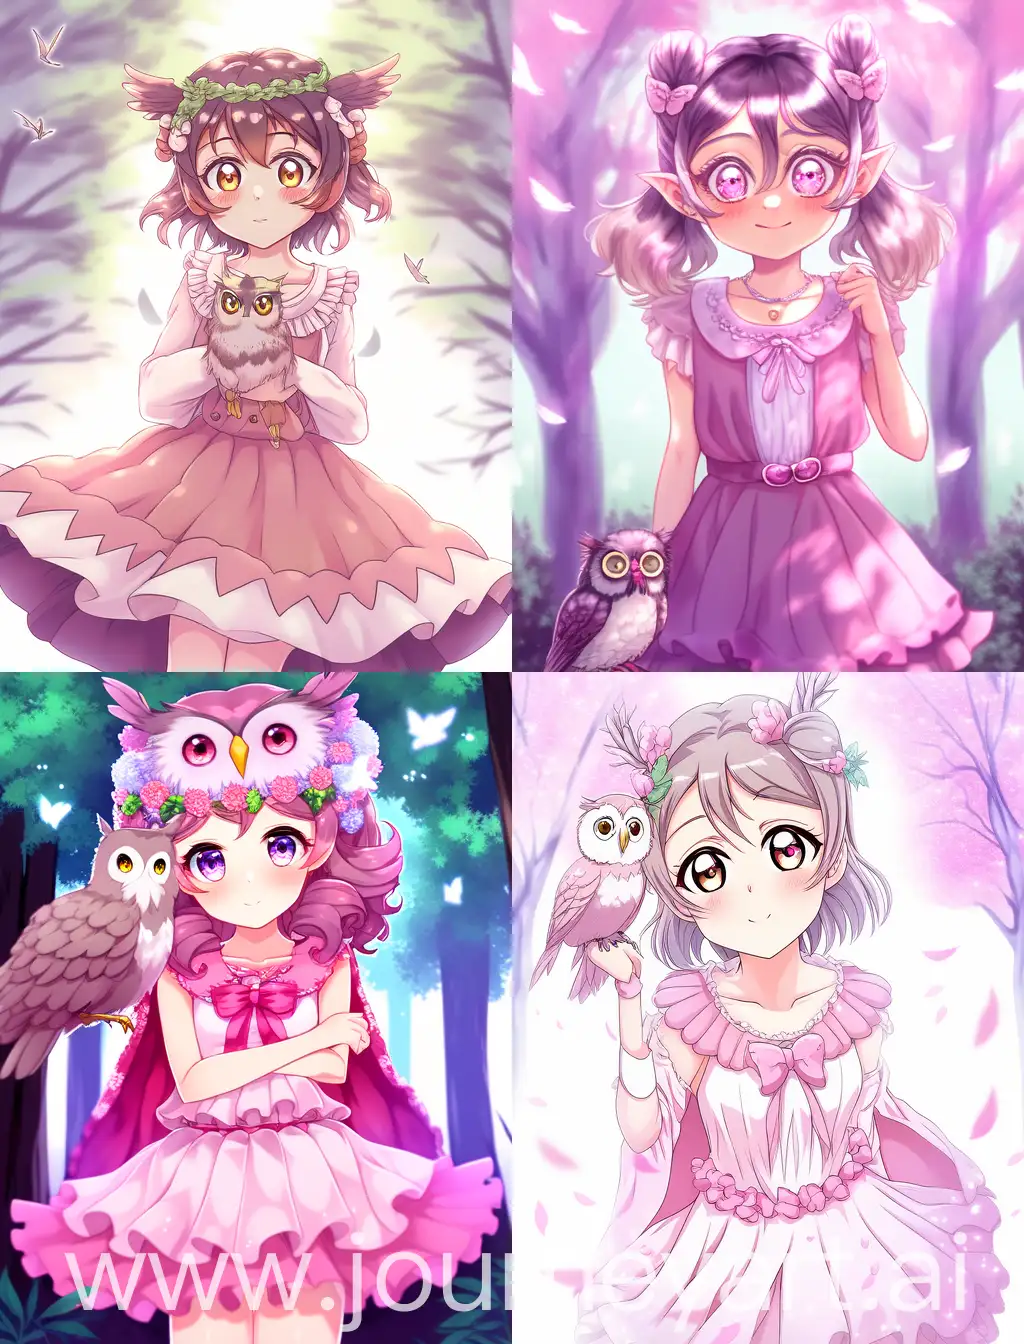 Anime-Girl-with-Owl-Tufts-in-Pink-Party-Dress